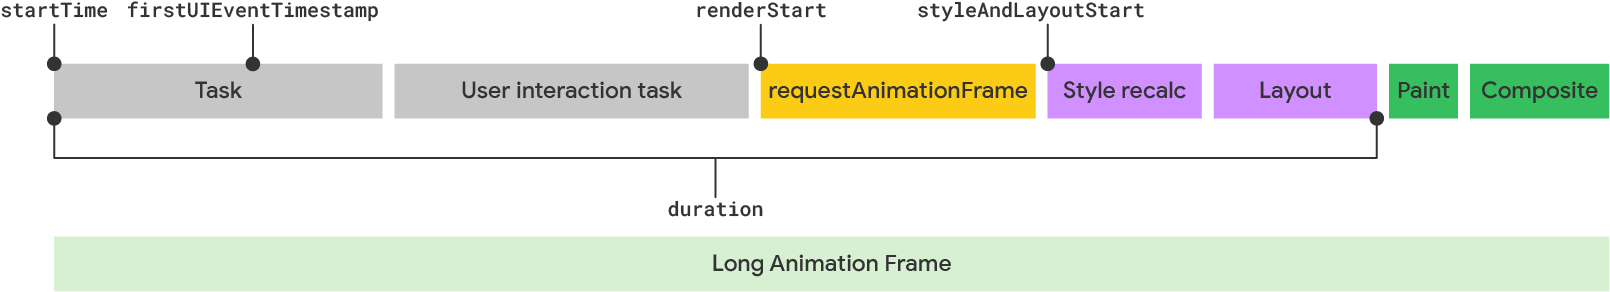 A visualization of a long animation frame according to the LoAF model.